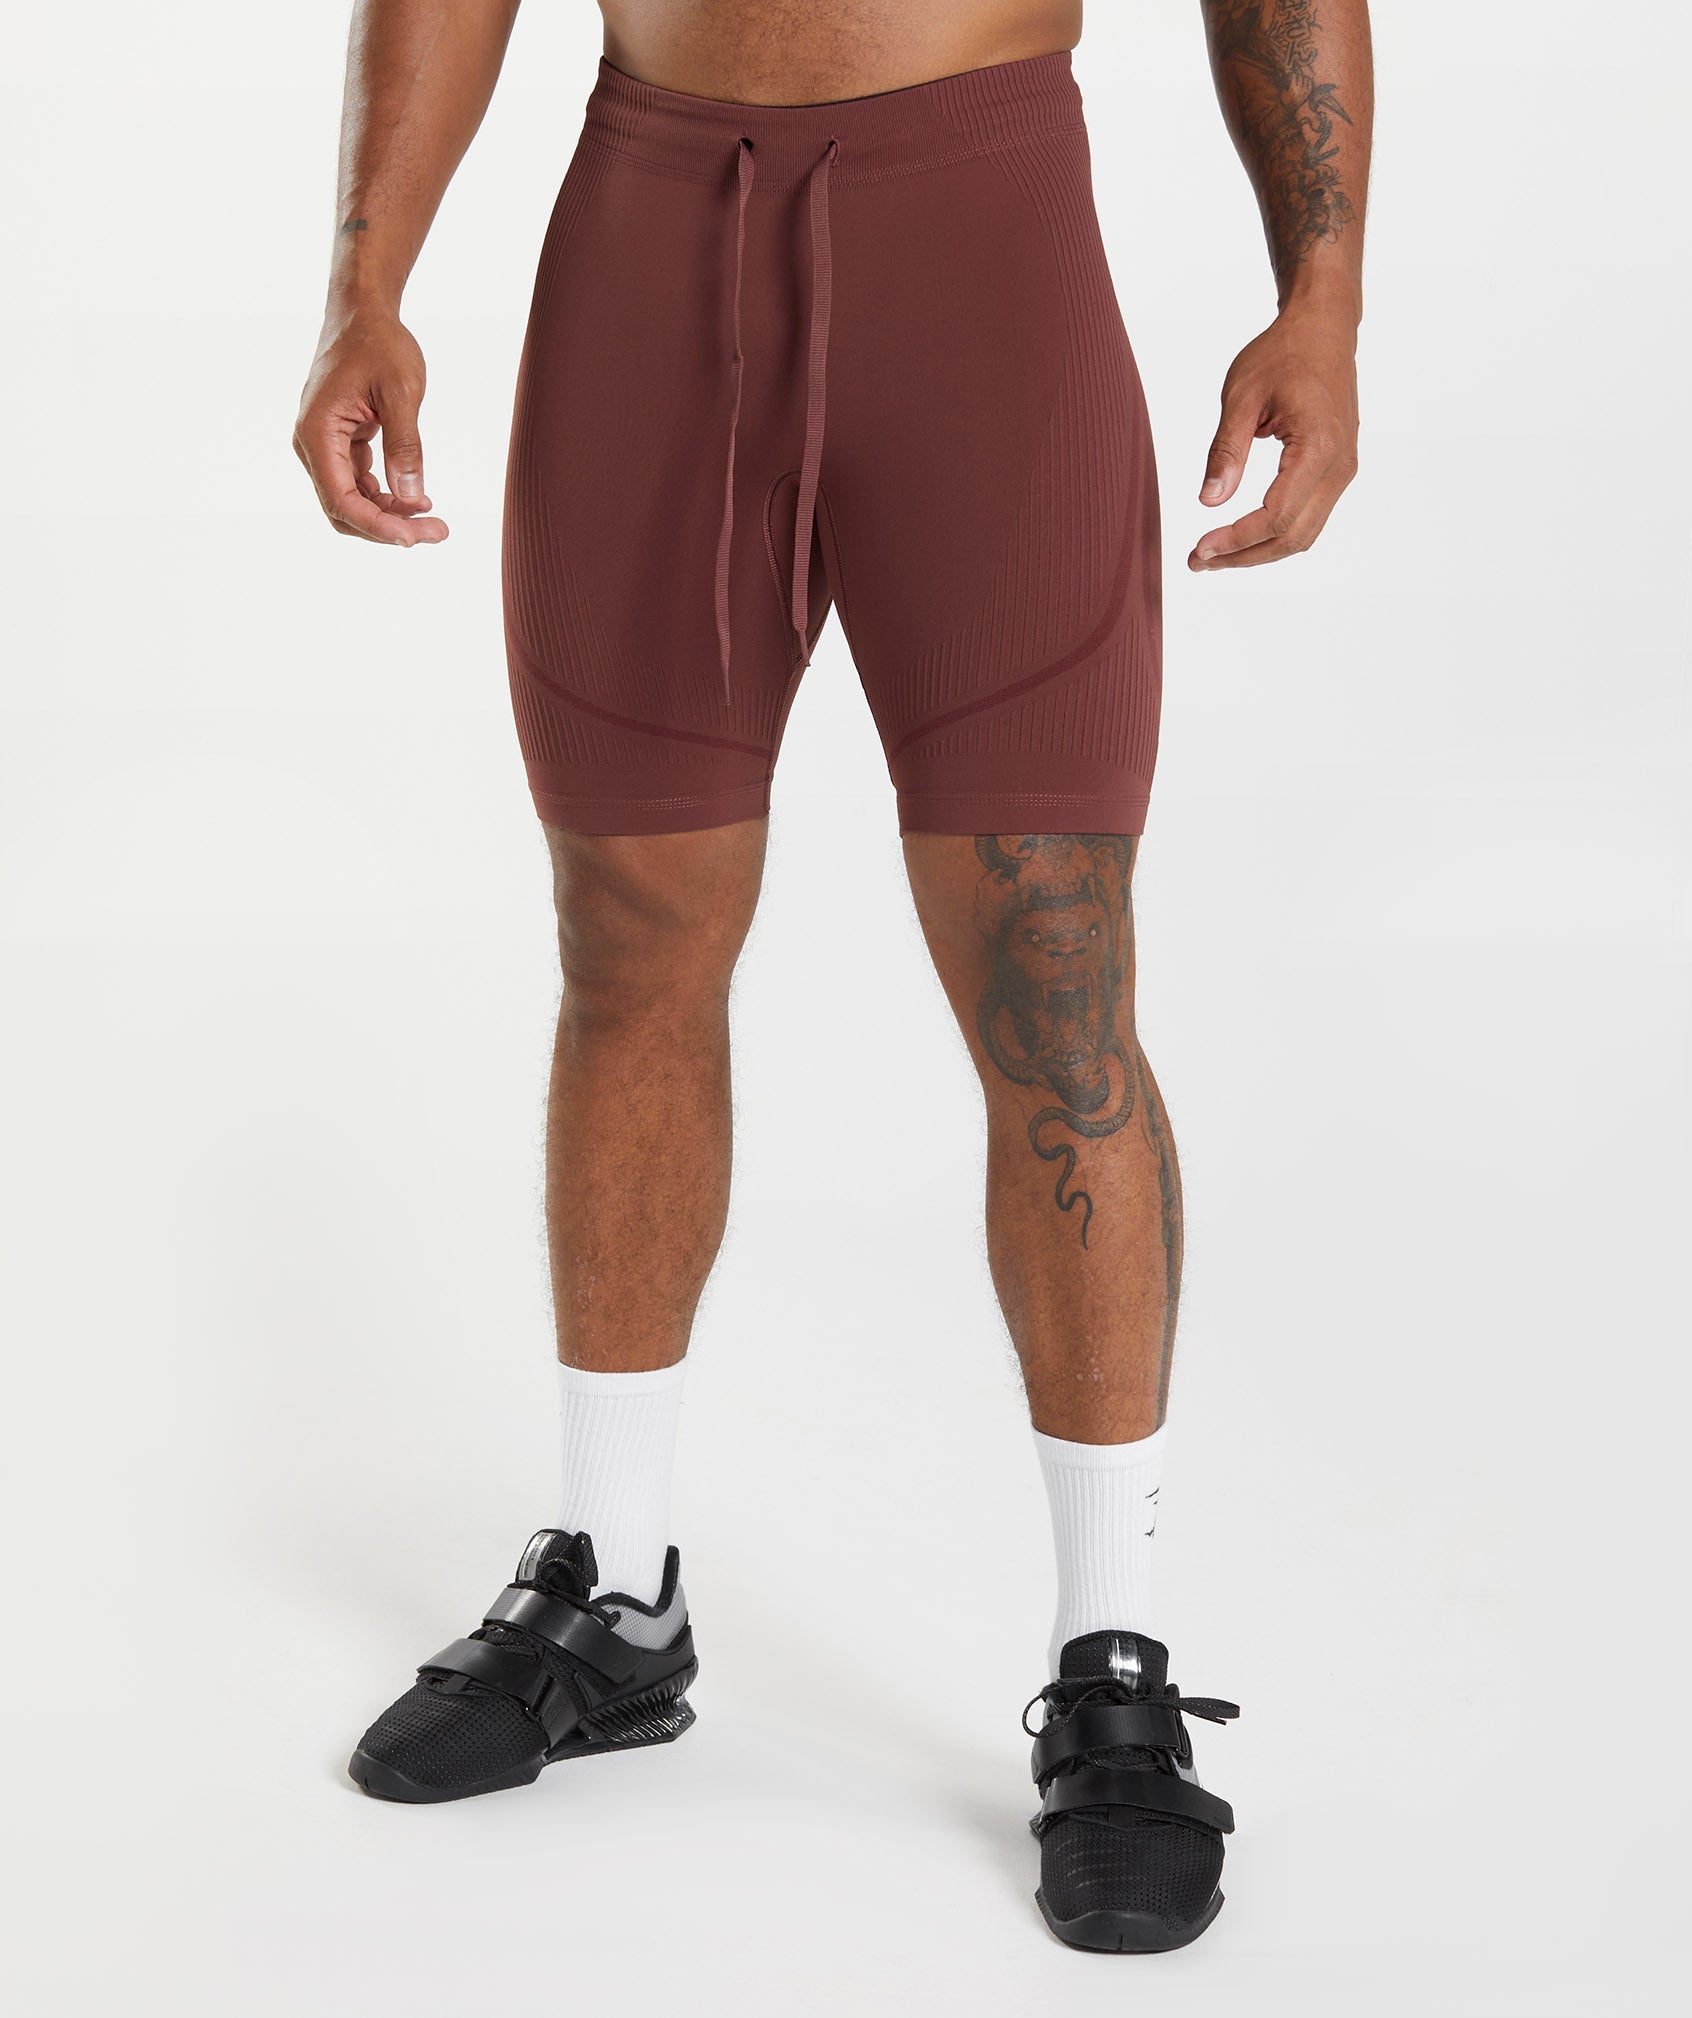 315 Seamless 1/2 Shorts in Cherry Brown/Athletic Maroon - view 1